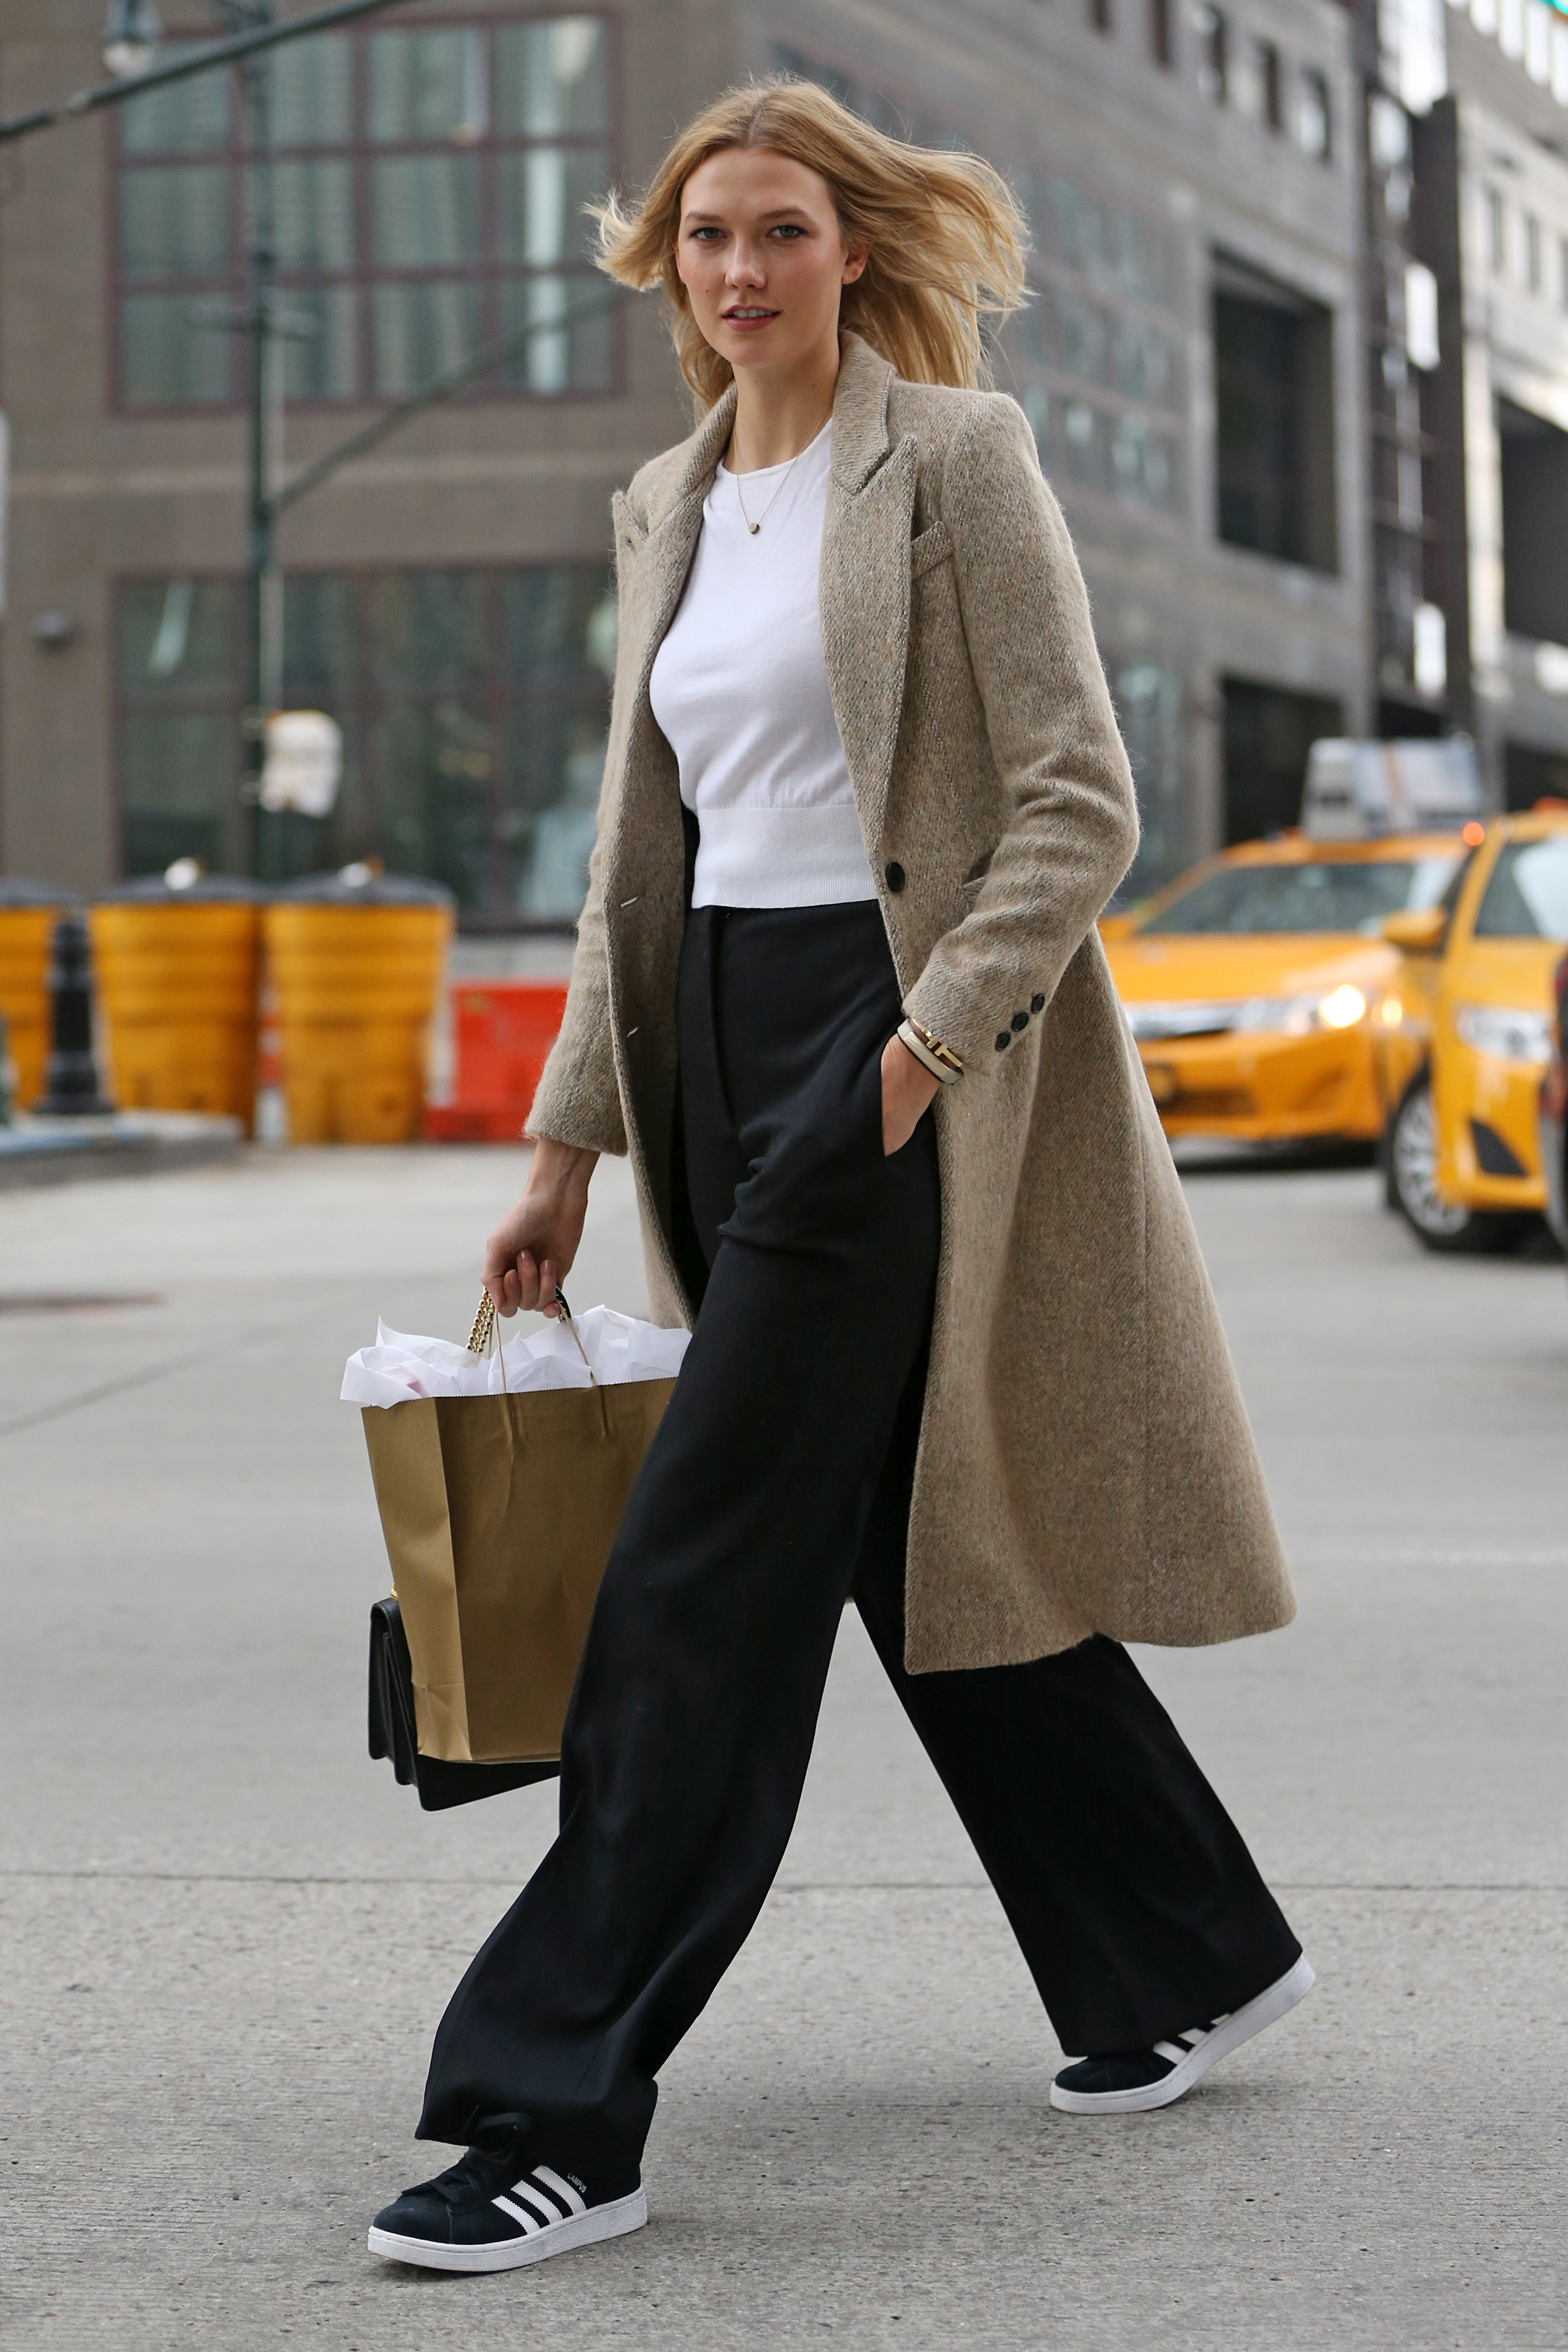 Karlie Kloss heads to a meeting in New York